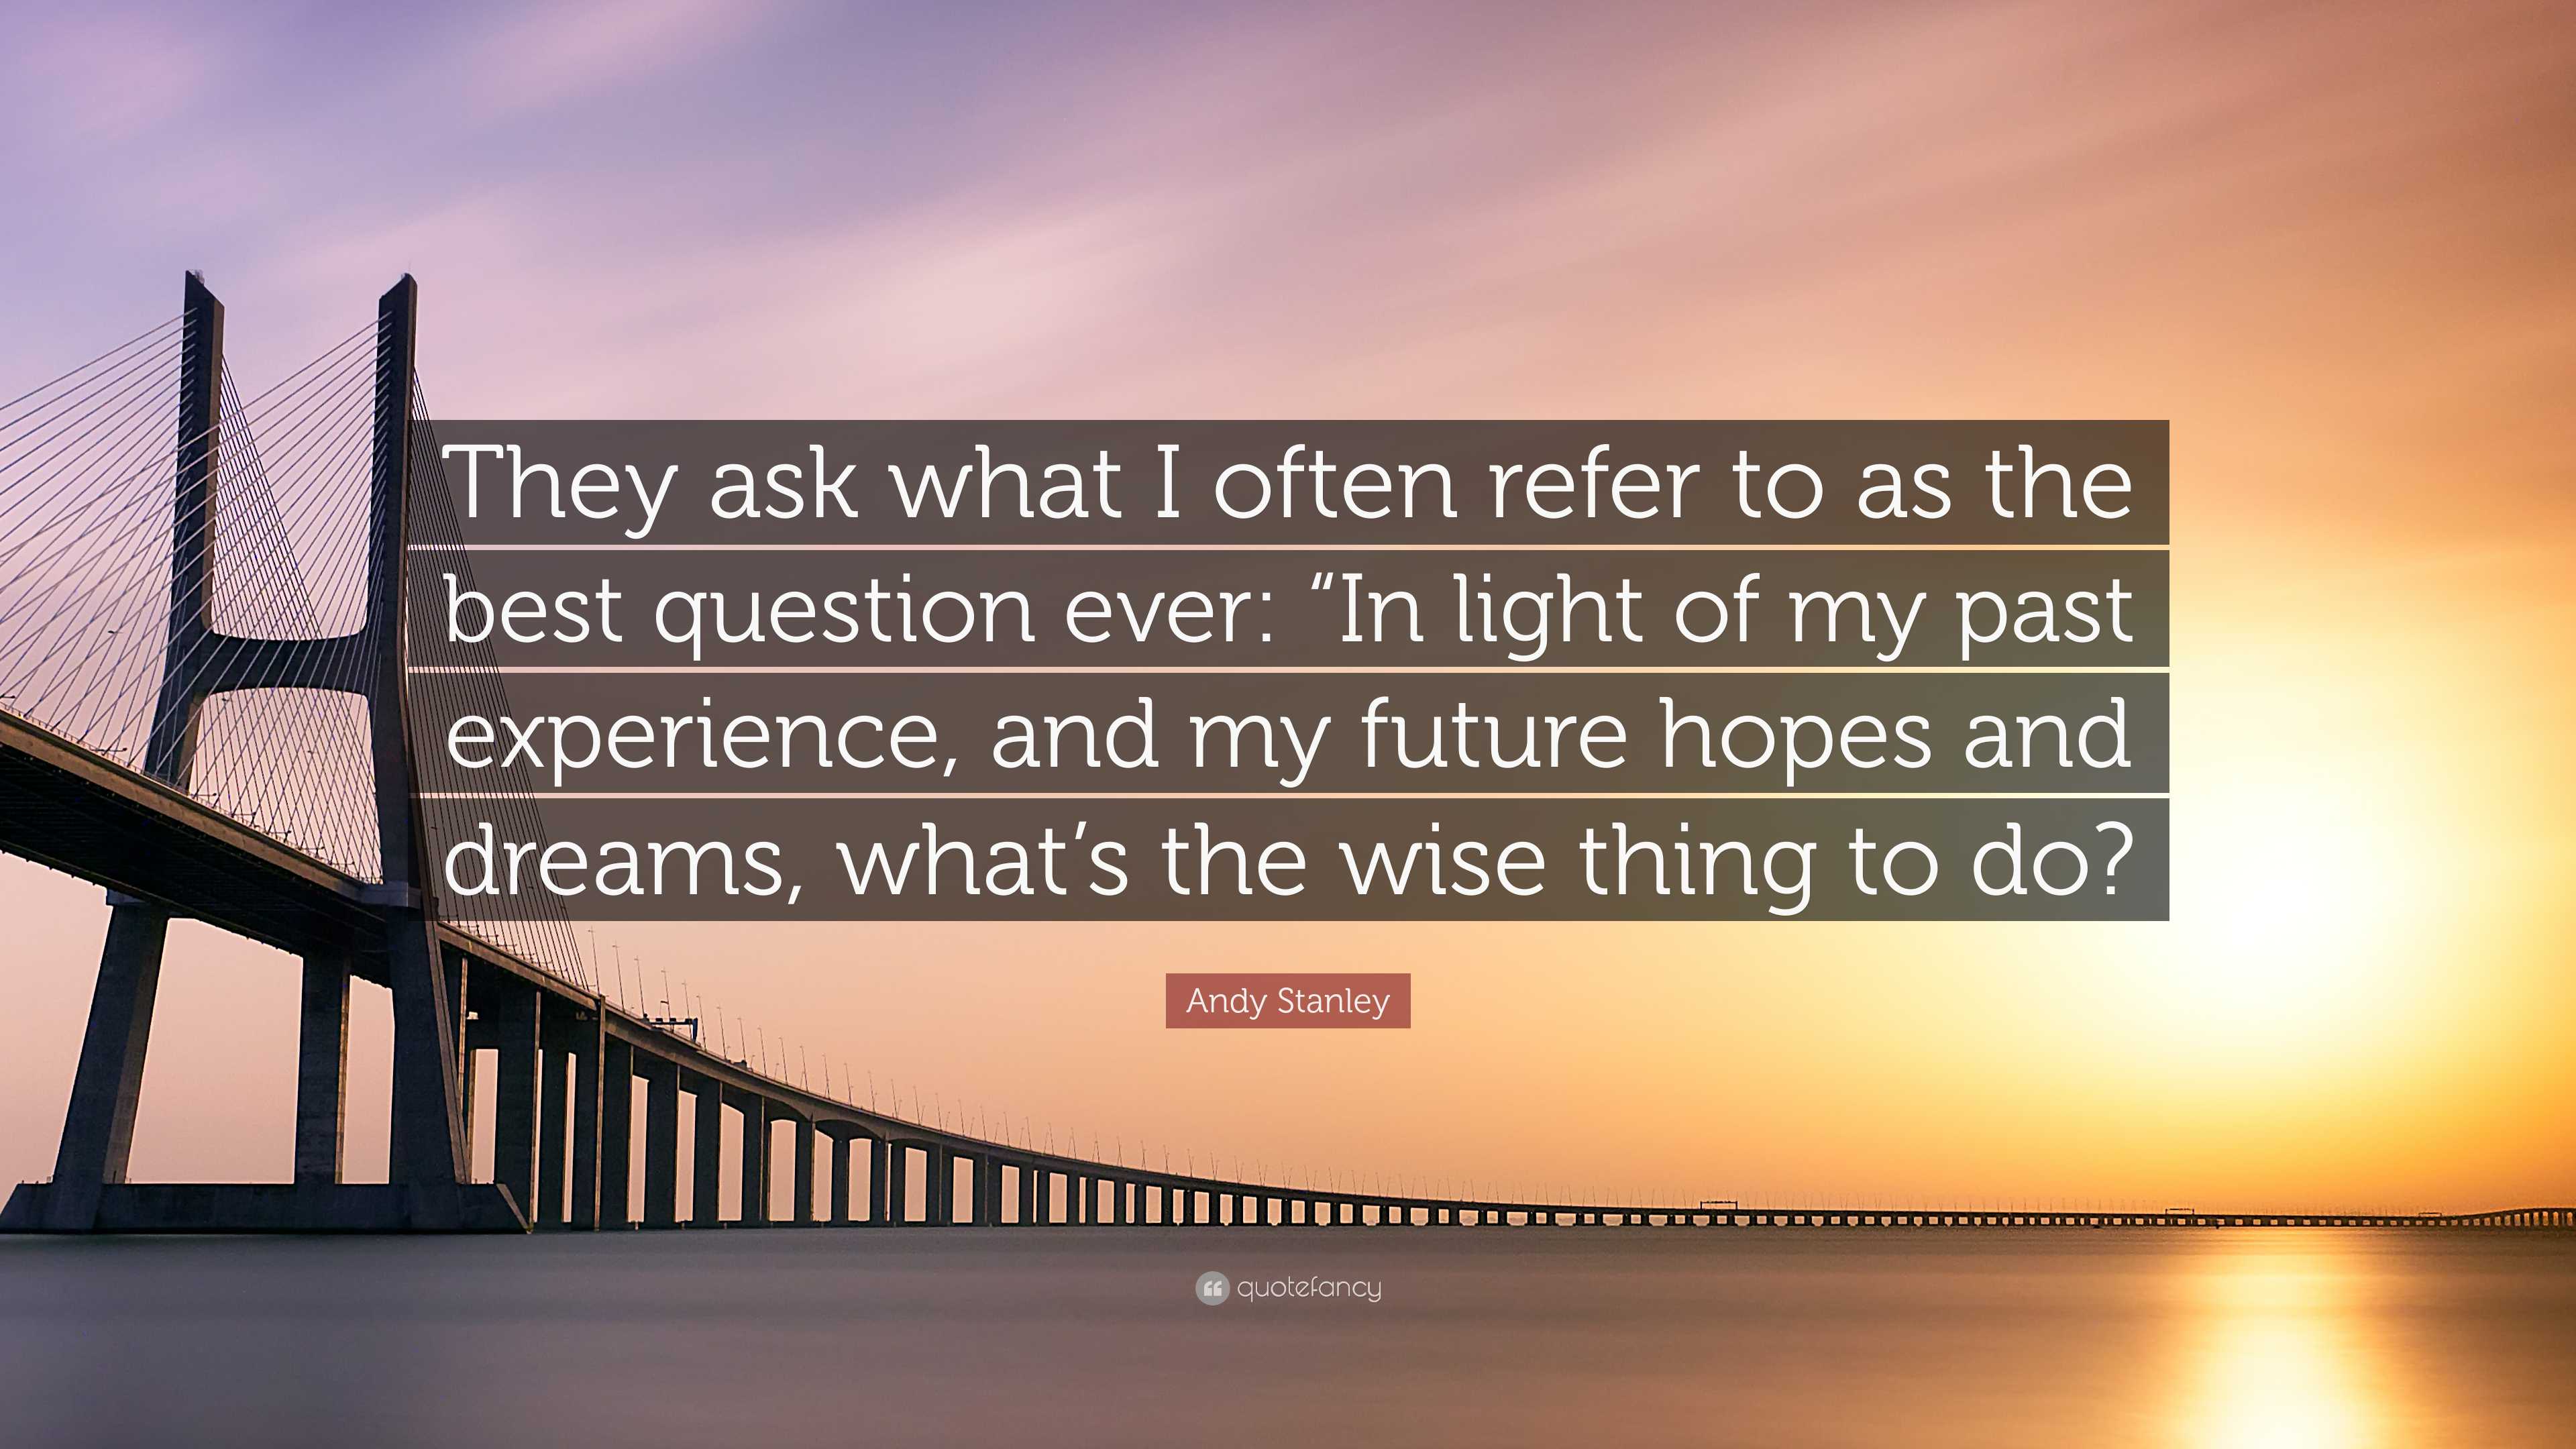 Andy Stanley Quote: “They ask what I often refer to as the best question  ever: “In light of my past experience, and my future hopes and dream”